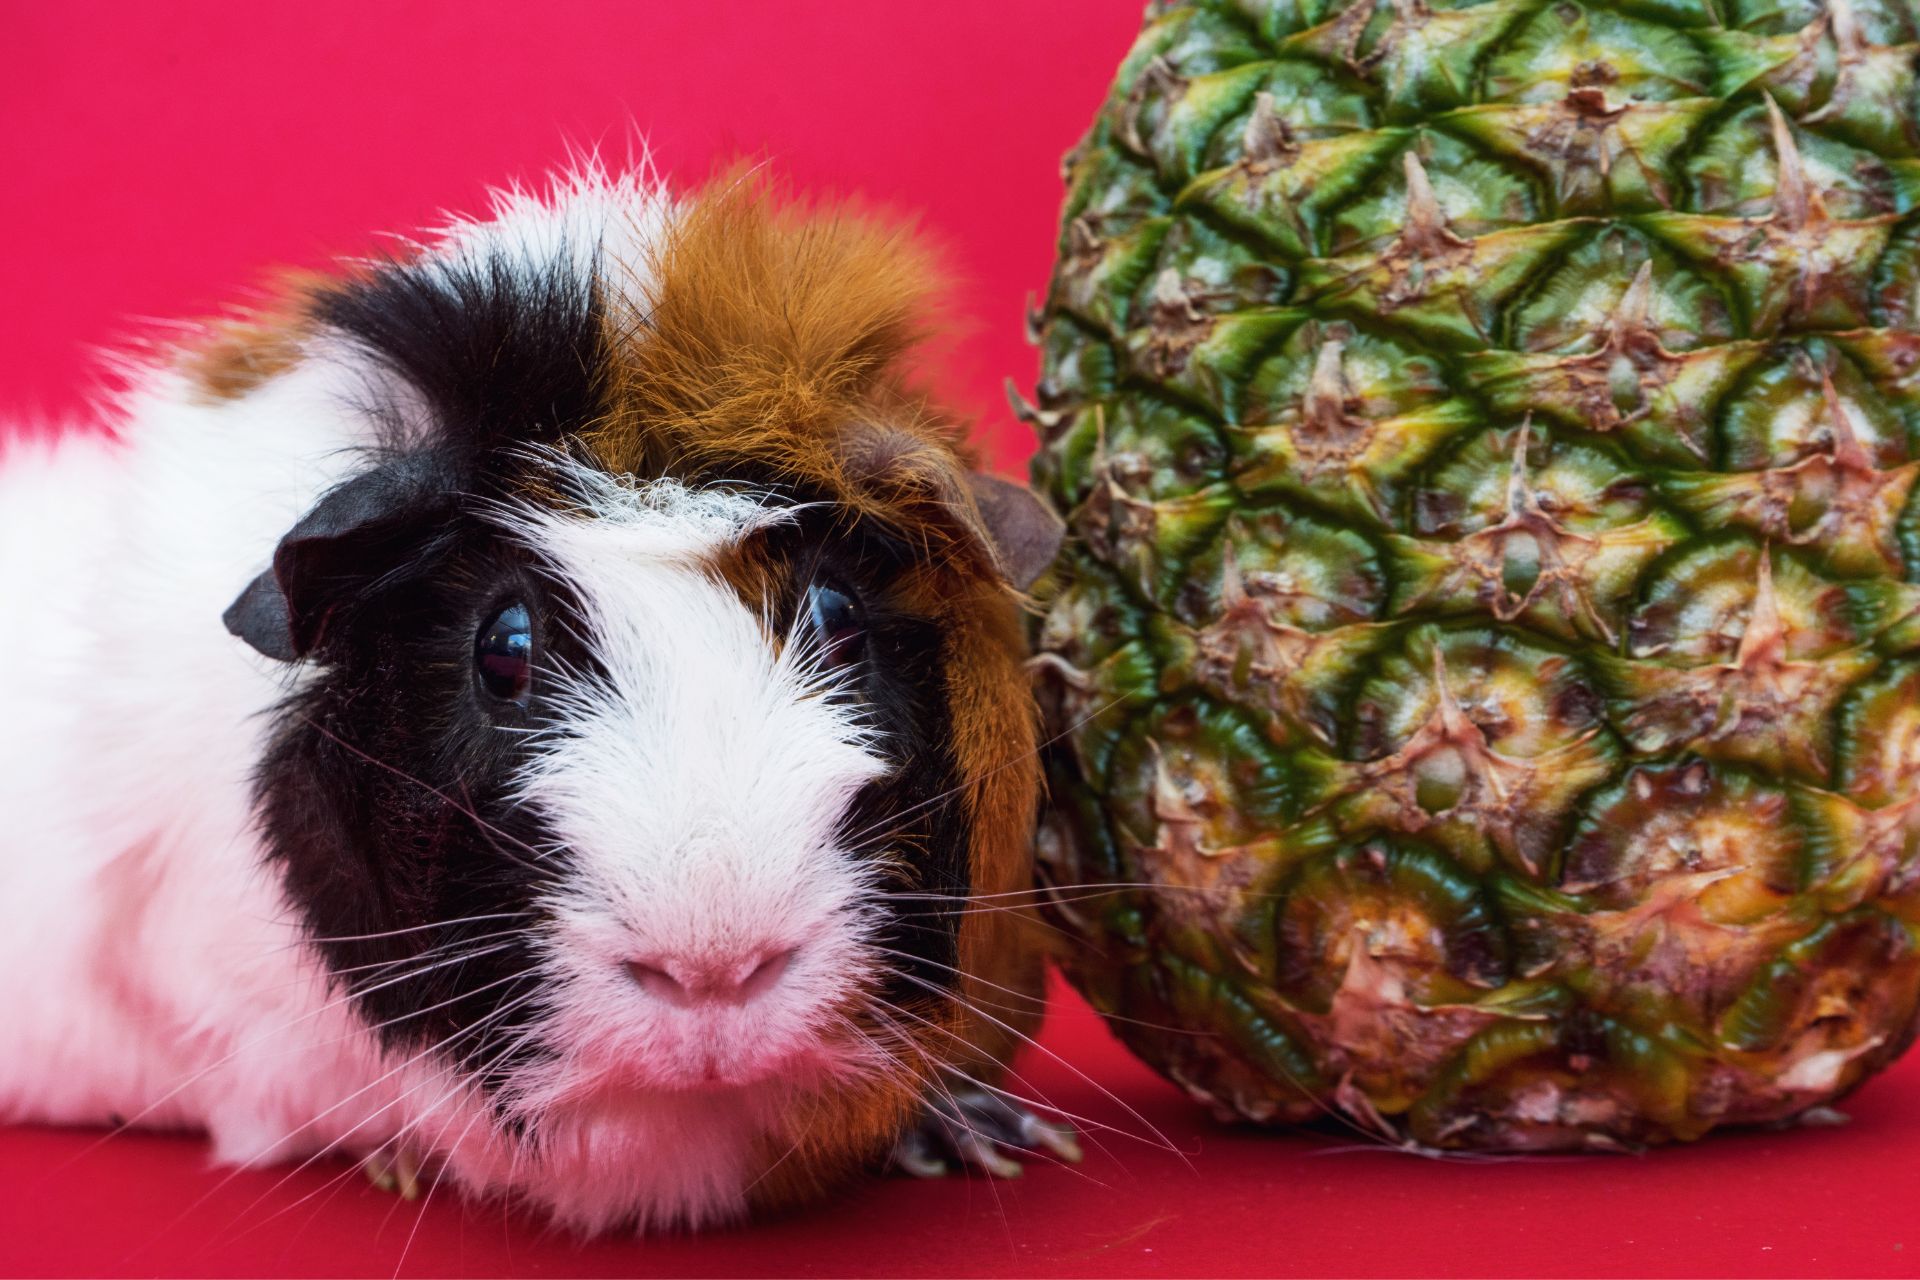 What Fruits Can Guinea Pigs Eat?